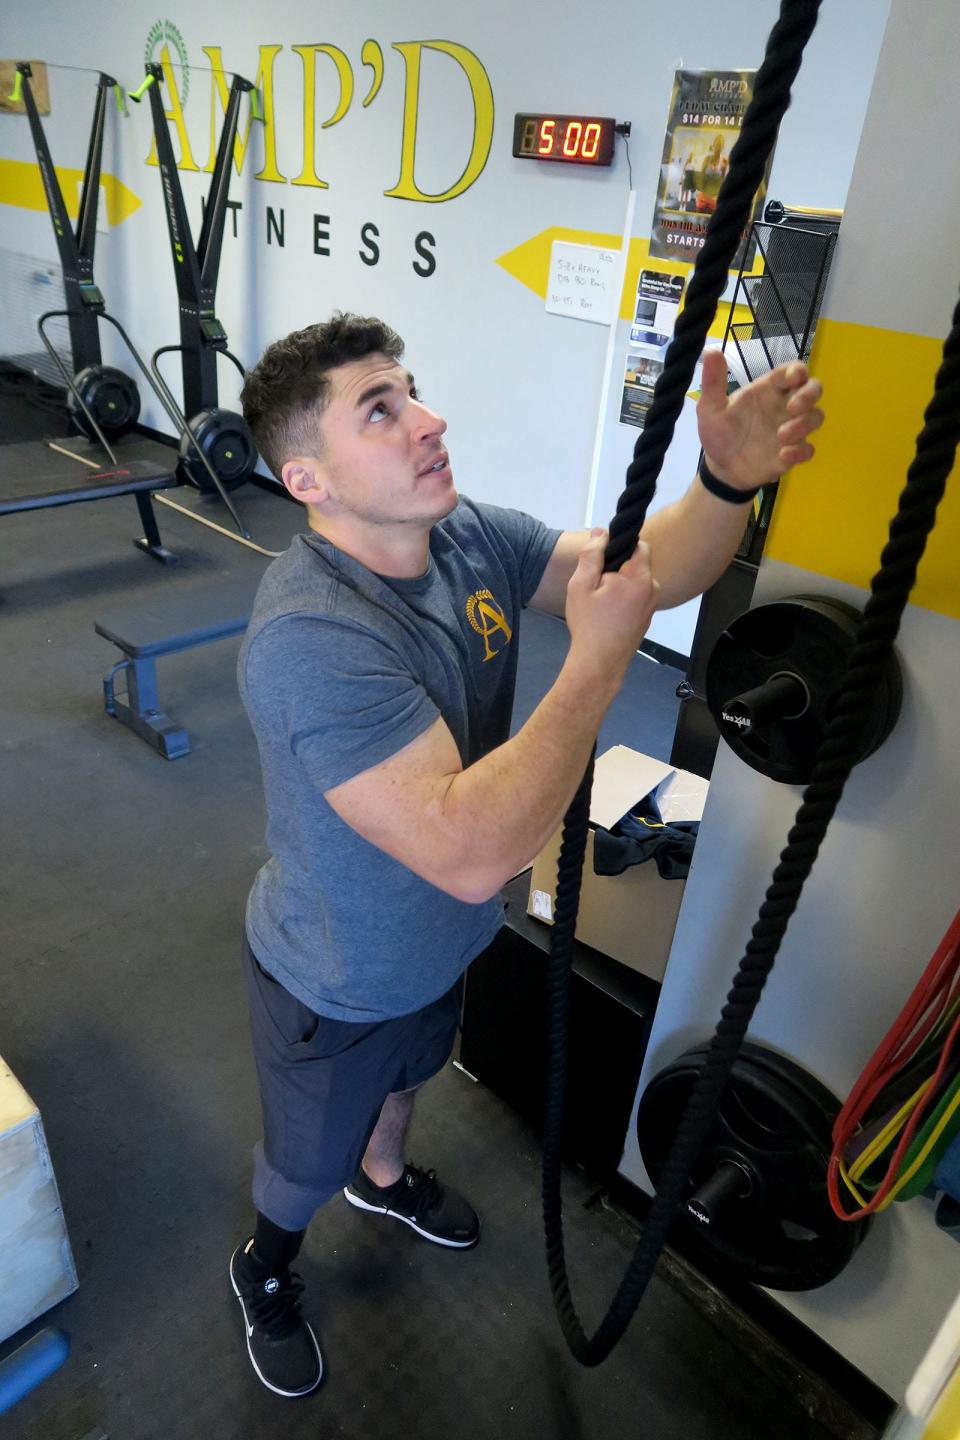 AMP'D Fitness owner Max Gomez demonstrates one of the machines in the Brielle fitness studio Monday, December 5, 2022.  The nearly two-year-old gym with locations in Manasquan and Brielle specializes in personalized strength training for adults ages 30 and over.